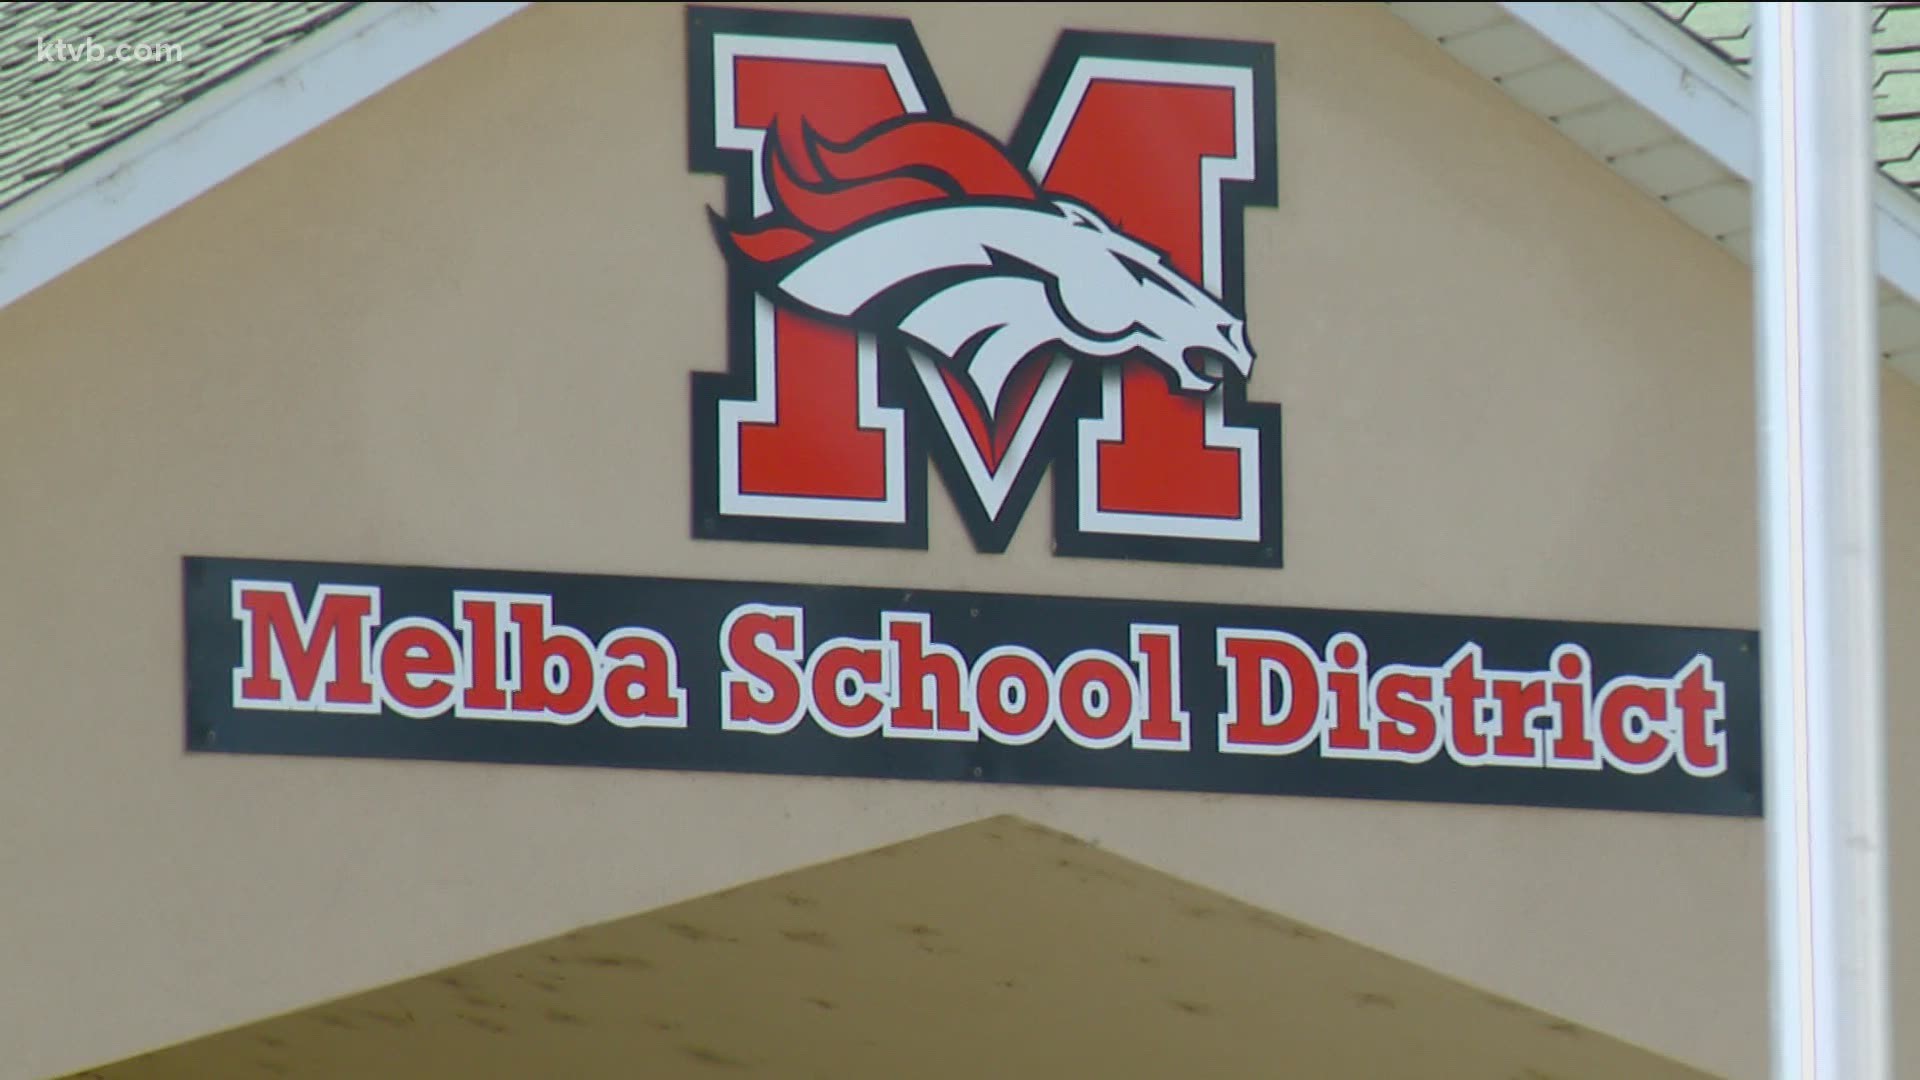 The district's superintendent told KTVB that parents and staff were overwhelmingly in favor of returning to school in-person.